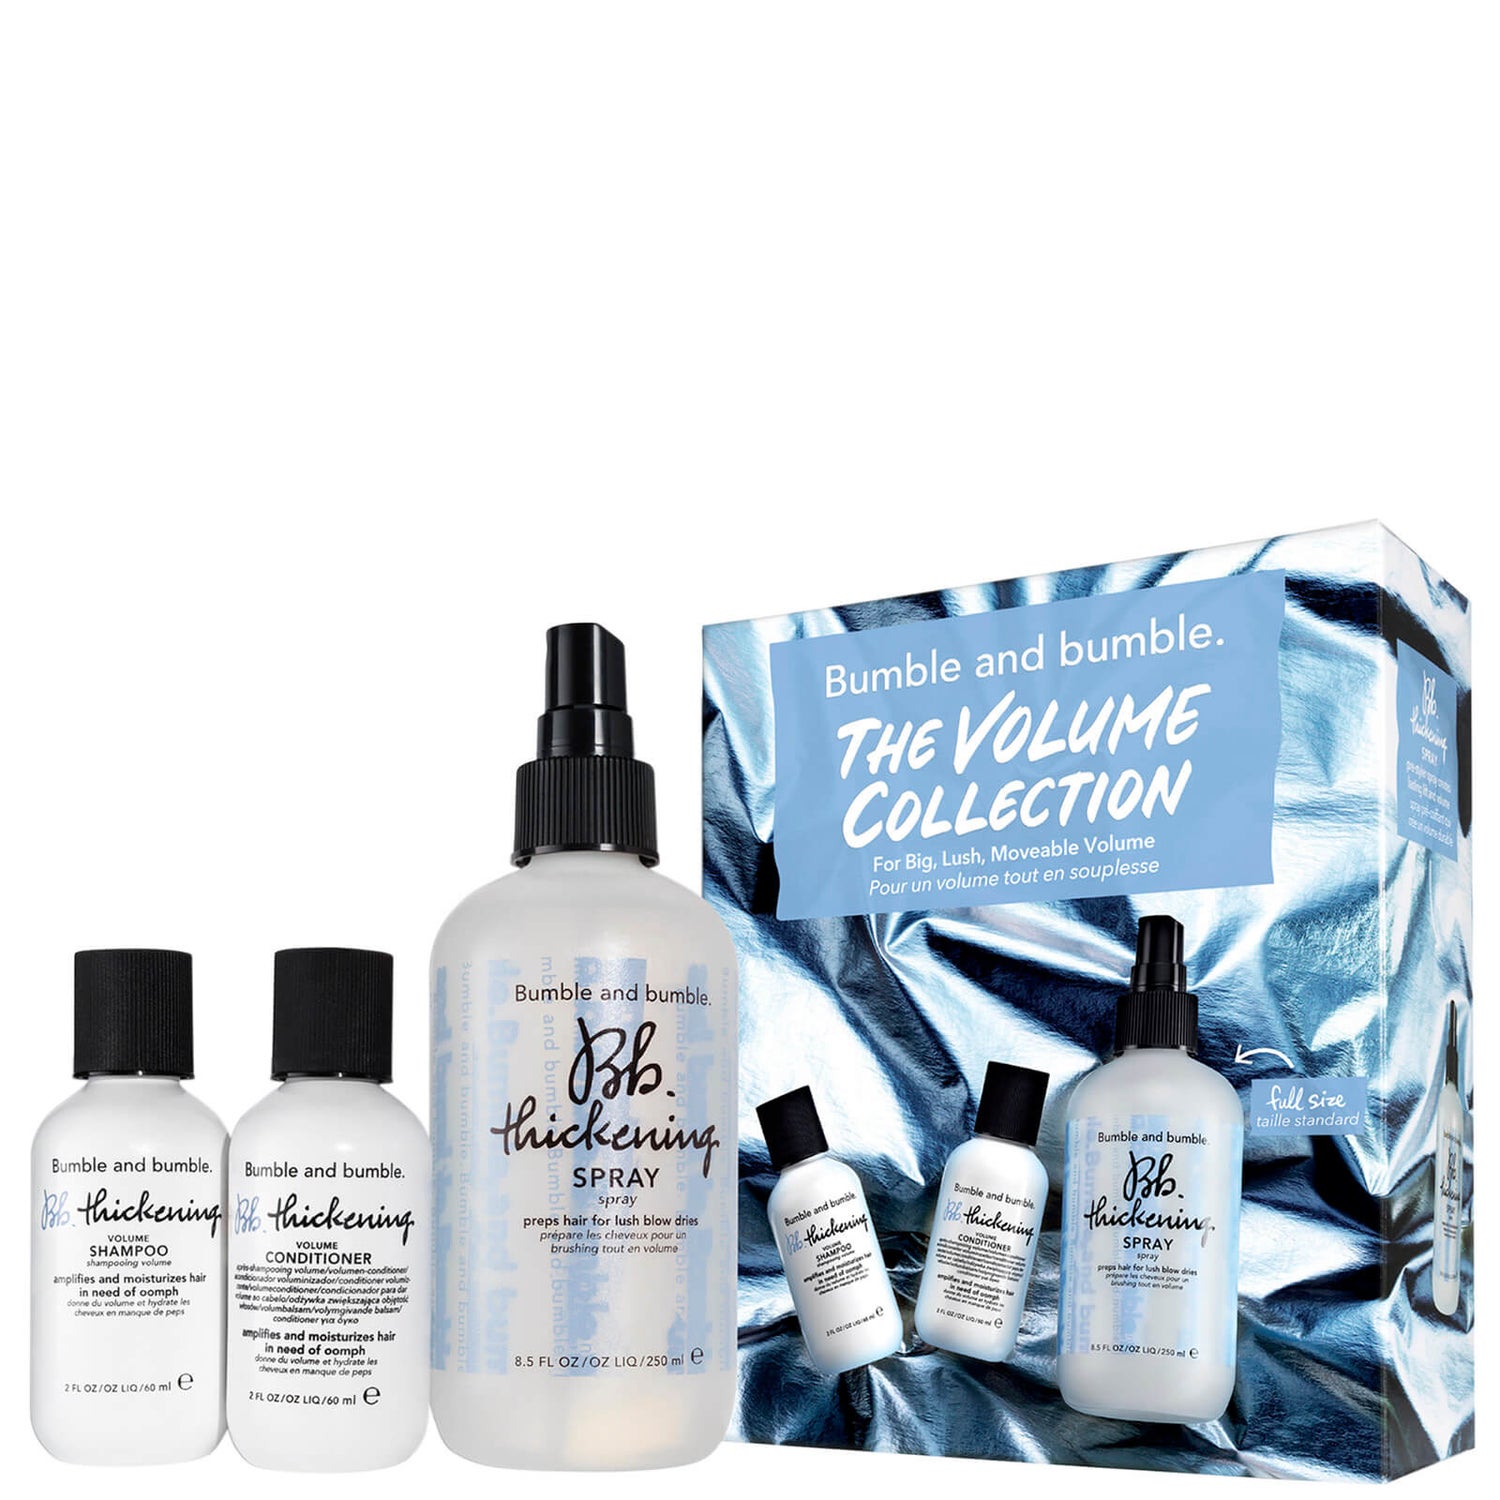 Bumble and bumble The Volume Collection (Worth £44.00)